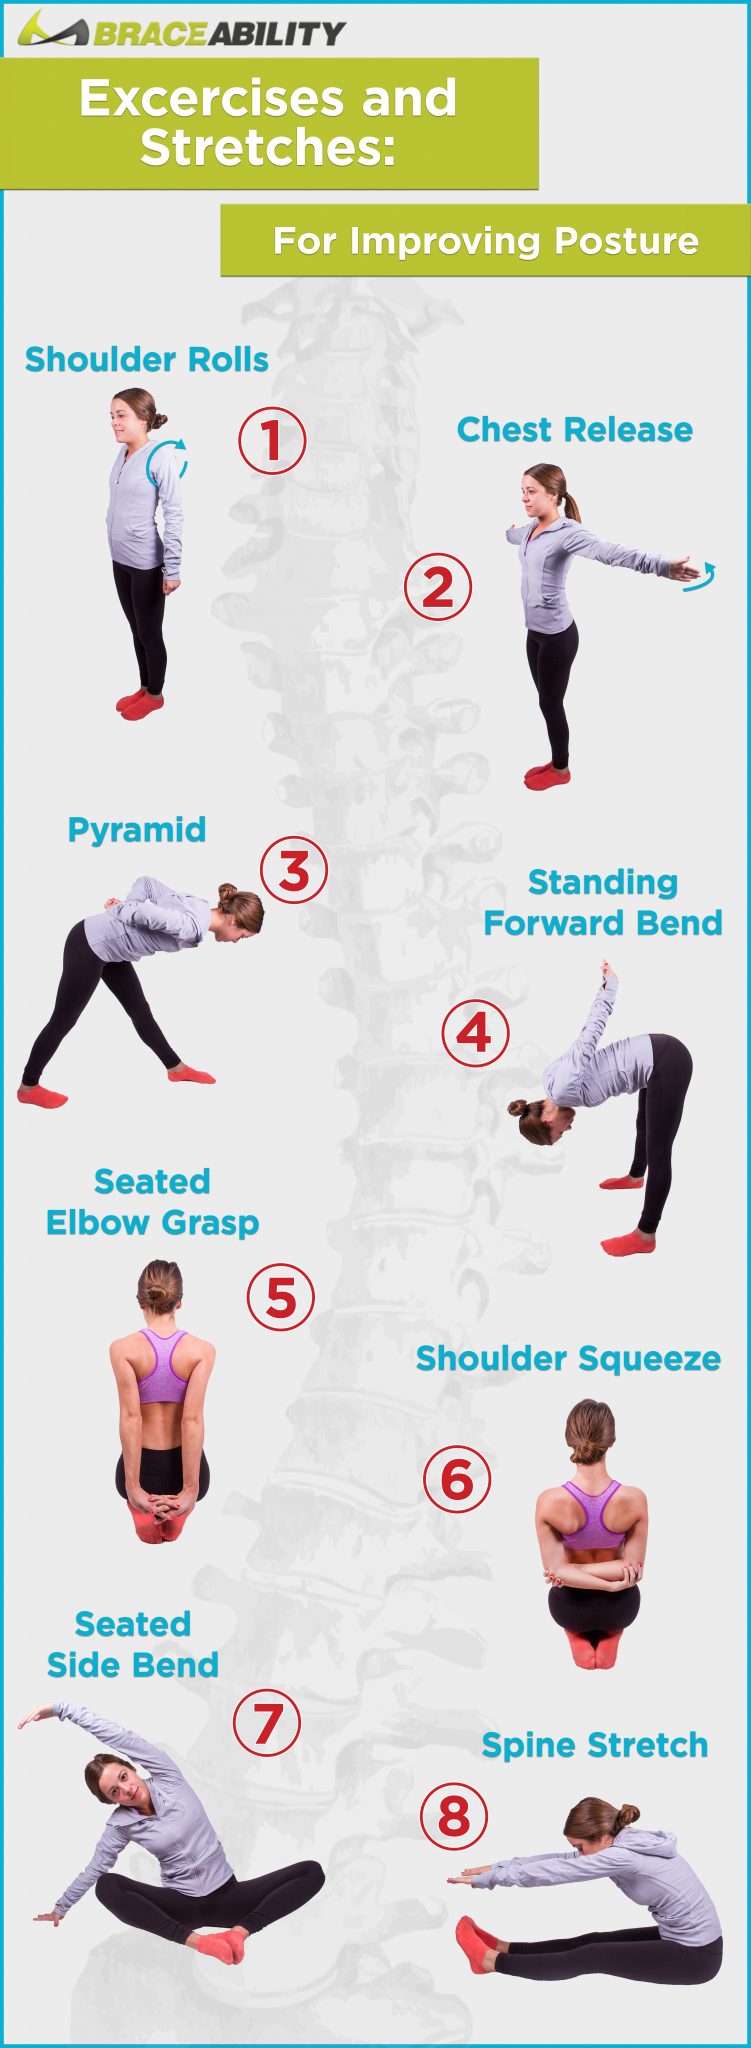 easy posture stretches and exercises for improving posture naturally